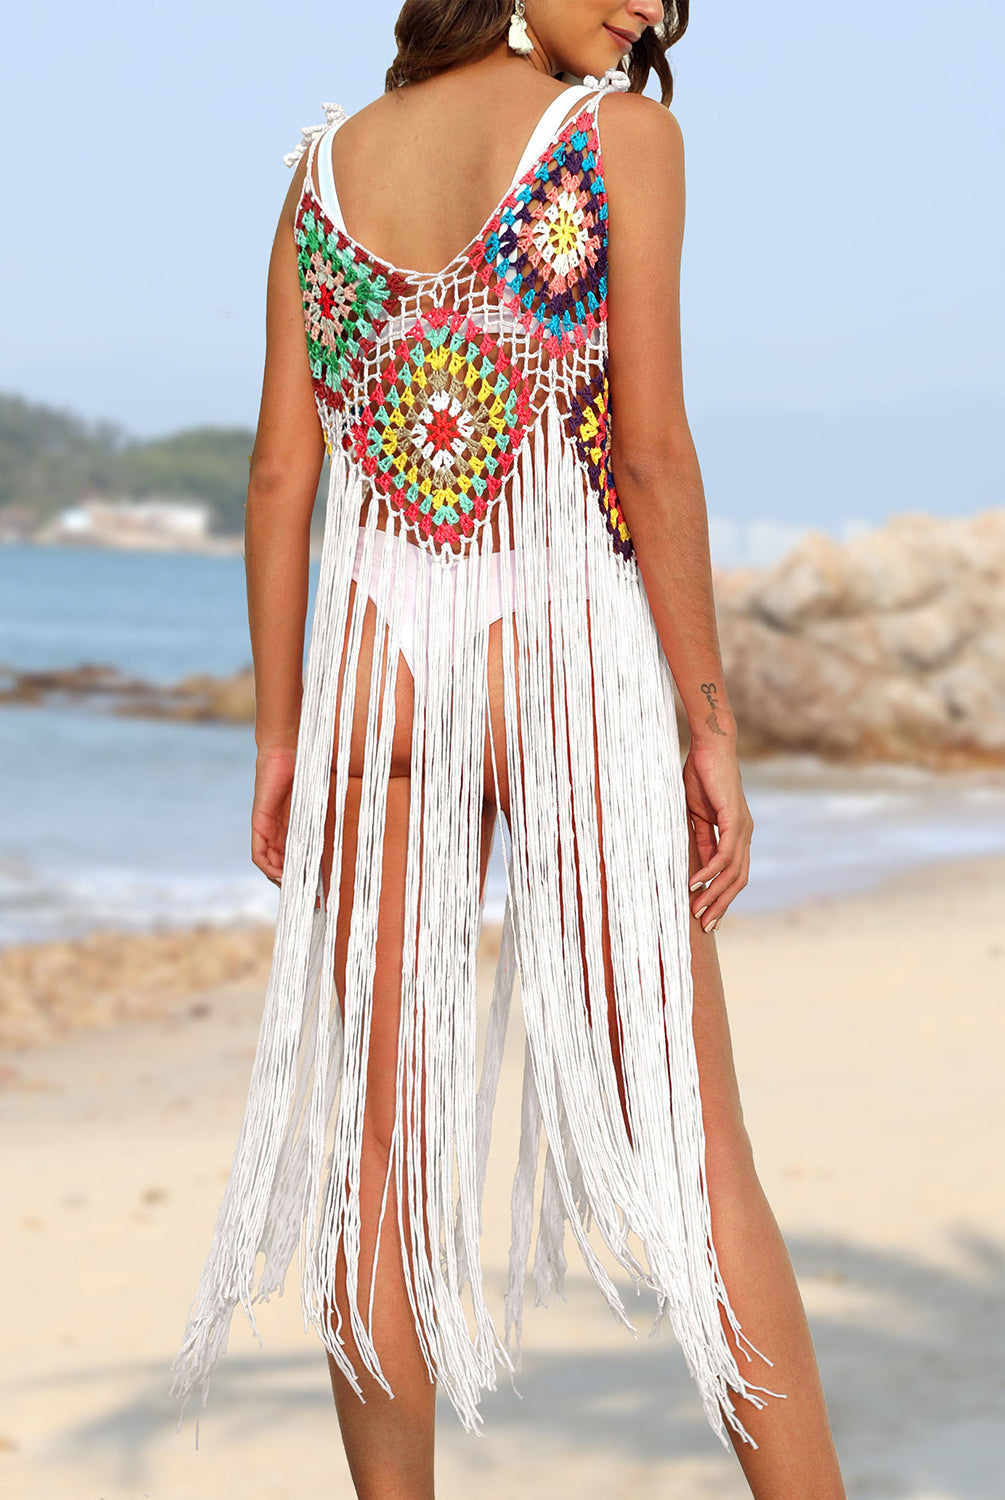 Model stylishly donning a colorful fringe cover up swimsuit on the beach